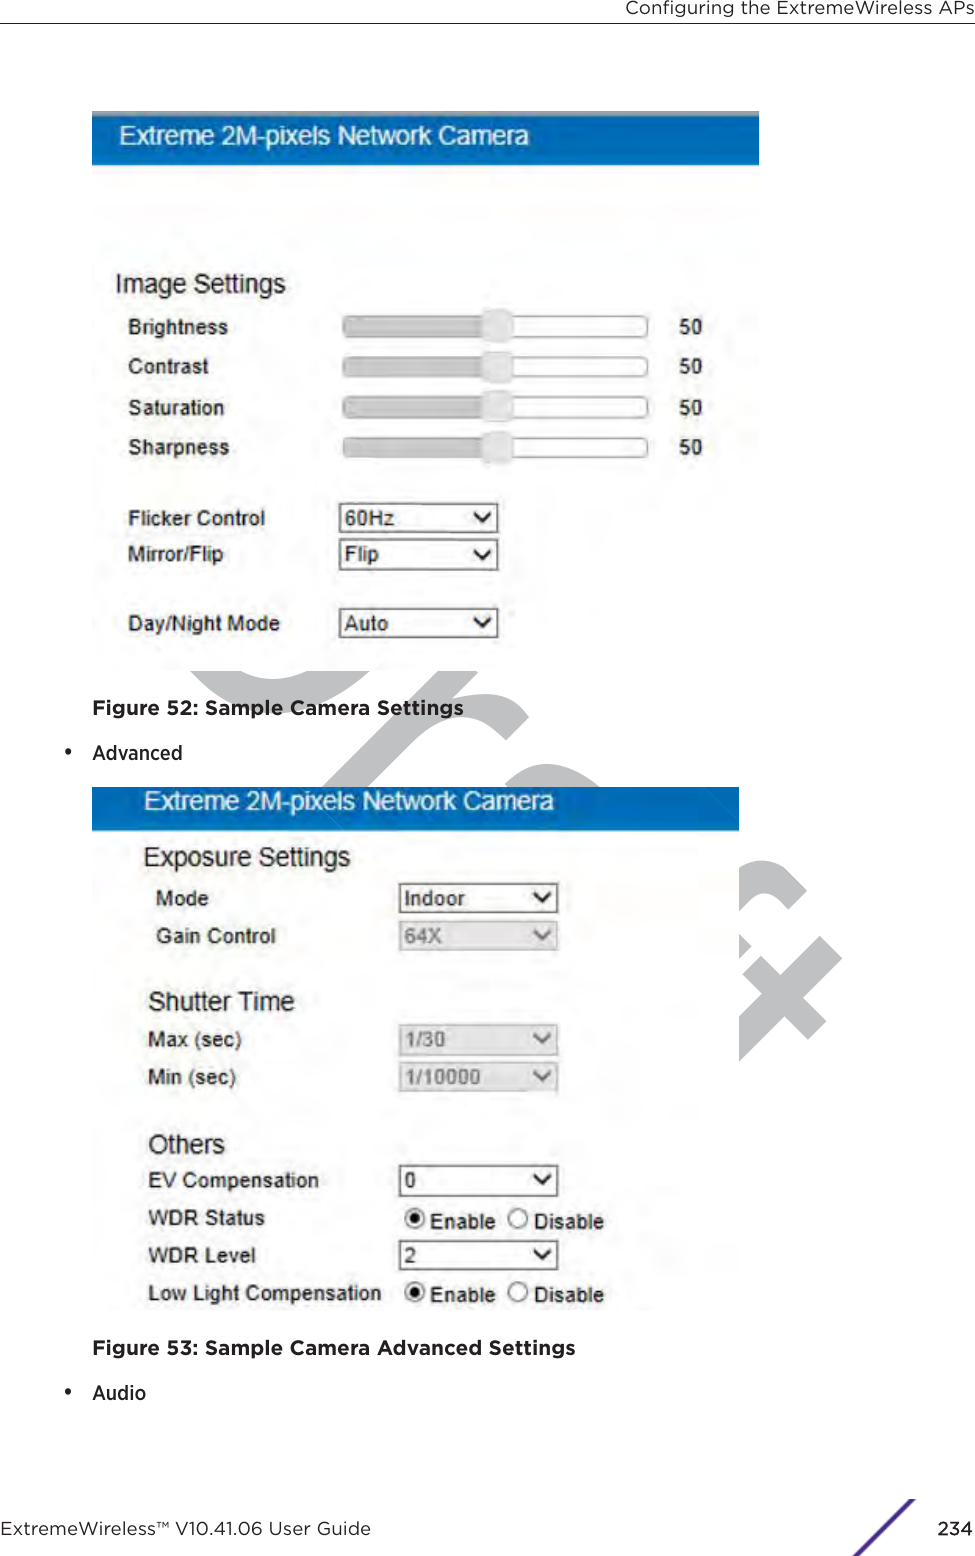 DraftFigure 52: Sample Camera Settings•AdvancedFigure 53: Sample Camera Advanced Settings•AudioConﬁguring the ExtremeWireless APsExtremeWireless™ V10.41.06 User Guide 2234